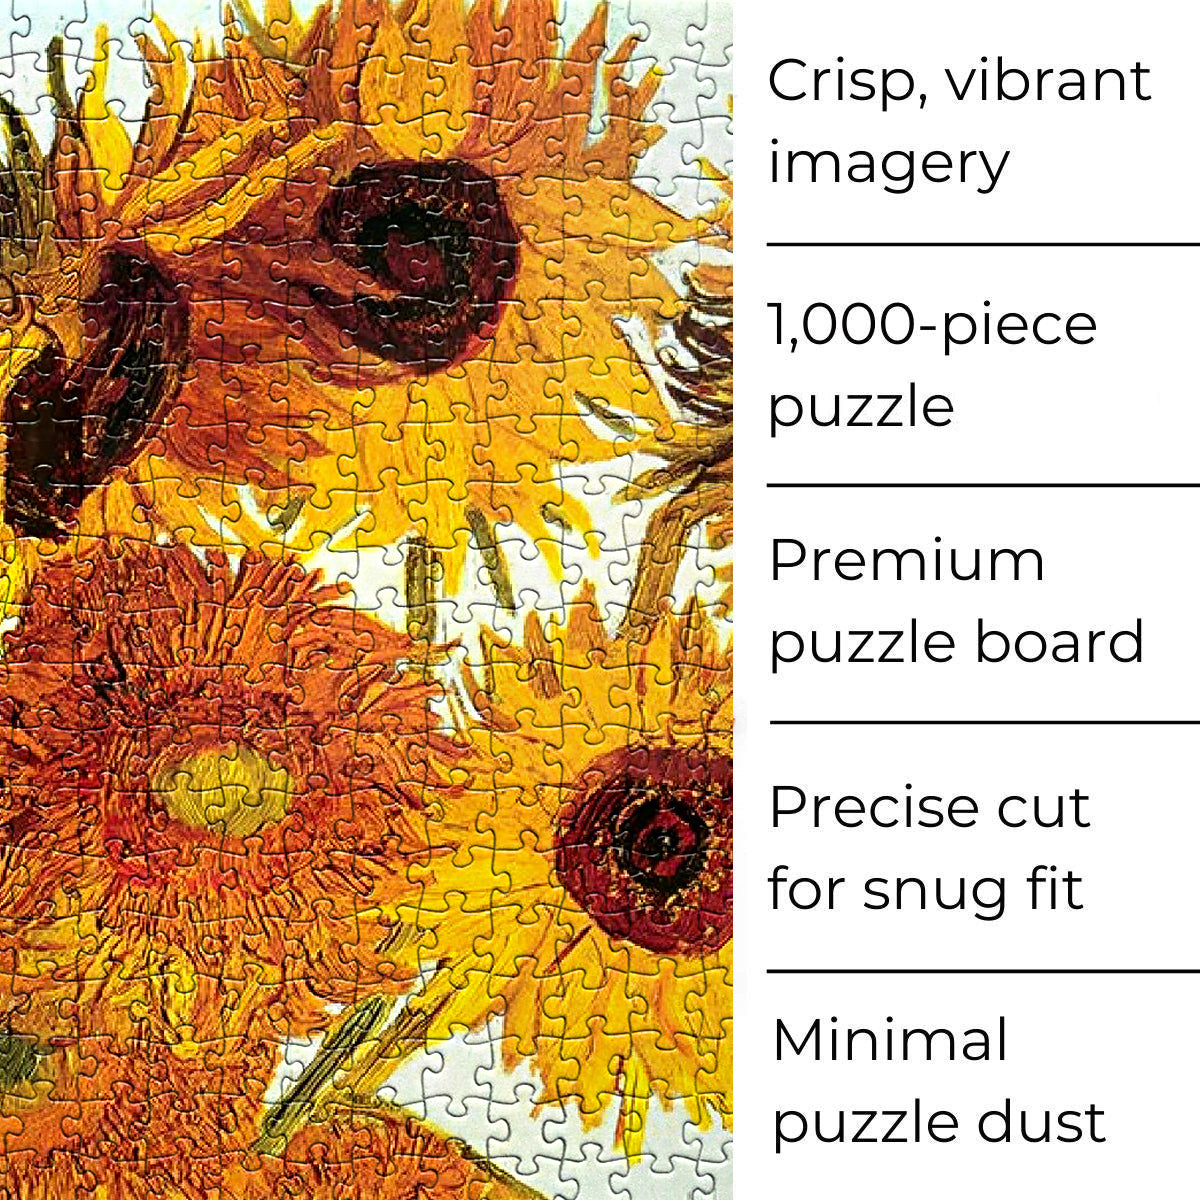 The best quality Vincent Van Gogh jigsaw puzzle featuring the artwork titled 'Vase with Twelve Sunflowers'.